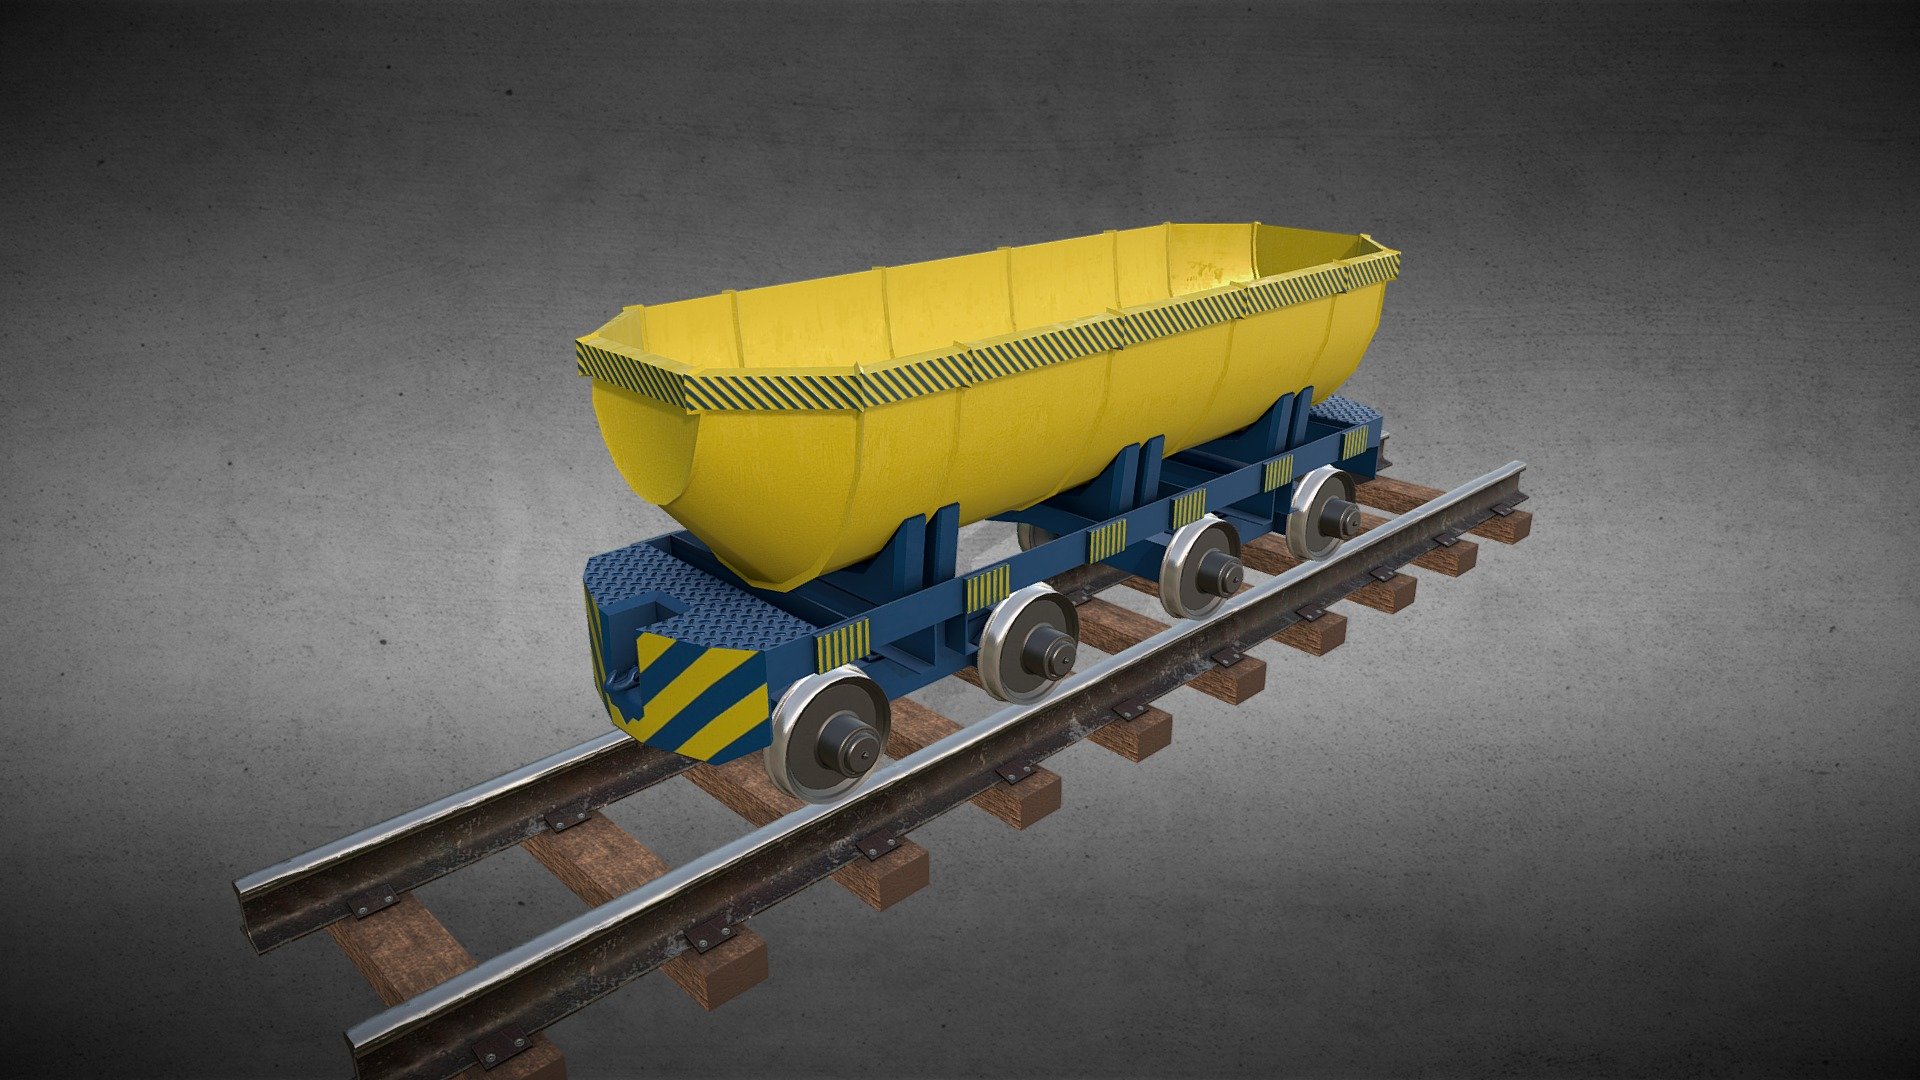 Mining trolley with 8 wheels. 

Available in Unity Asset Store - Mining trolley type "A" - 3D model by pavelmo4alov 3d model